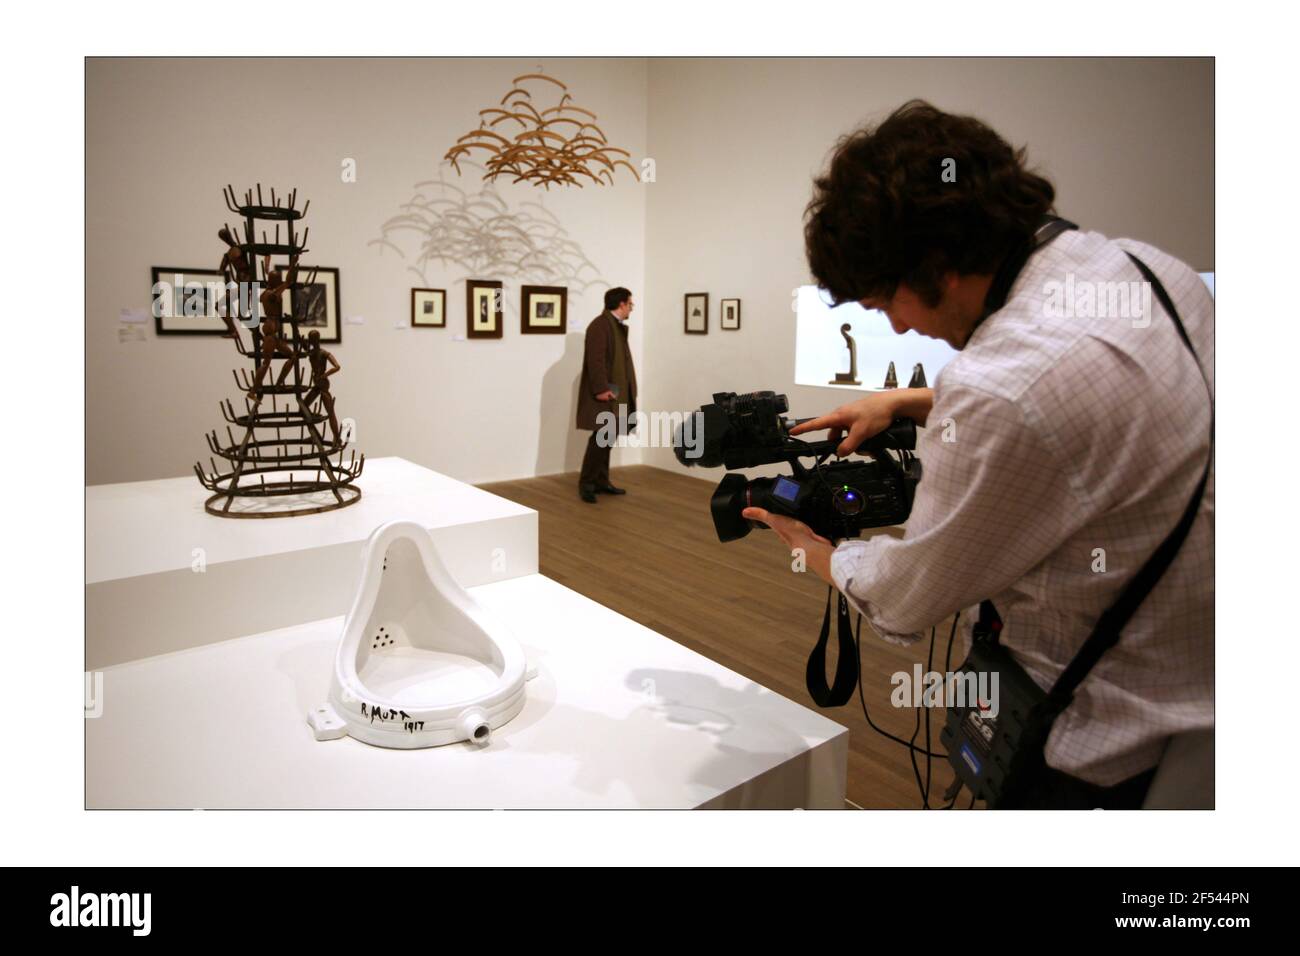 Marcel Duchamp... Fountain 1917, replica 1964Duchamp, Man Ray, Picabia Exhibition at the Tate Modern 21 Feb - 26 may 2008 photograph by David Sandison The Independent Stock Photo